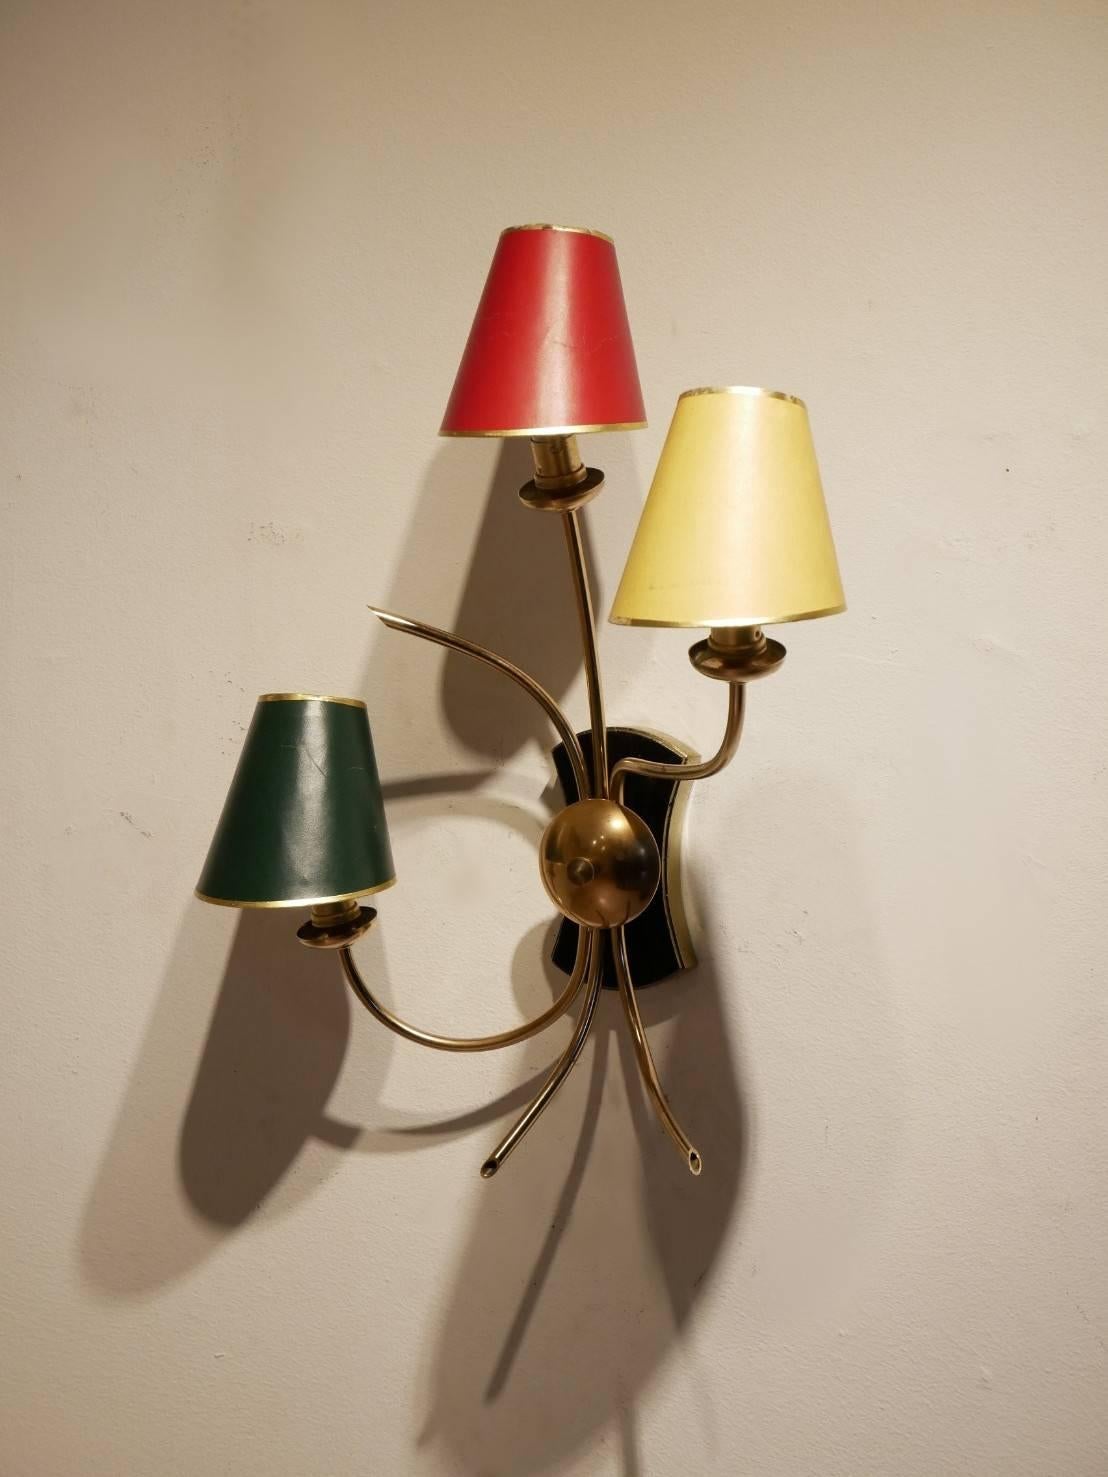 Midcentury French wall sconce in the shape of a small tree, organic bent brass structure matched with black and gold painted wooden wall mount base, original tricolor red / yellow / green paper clip-on shades.